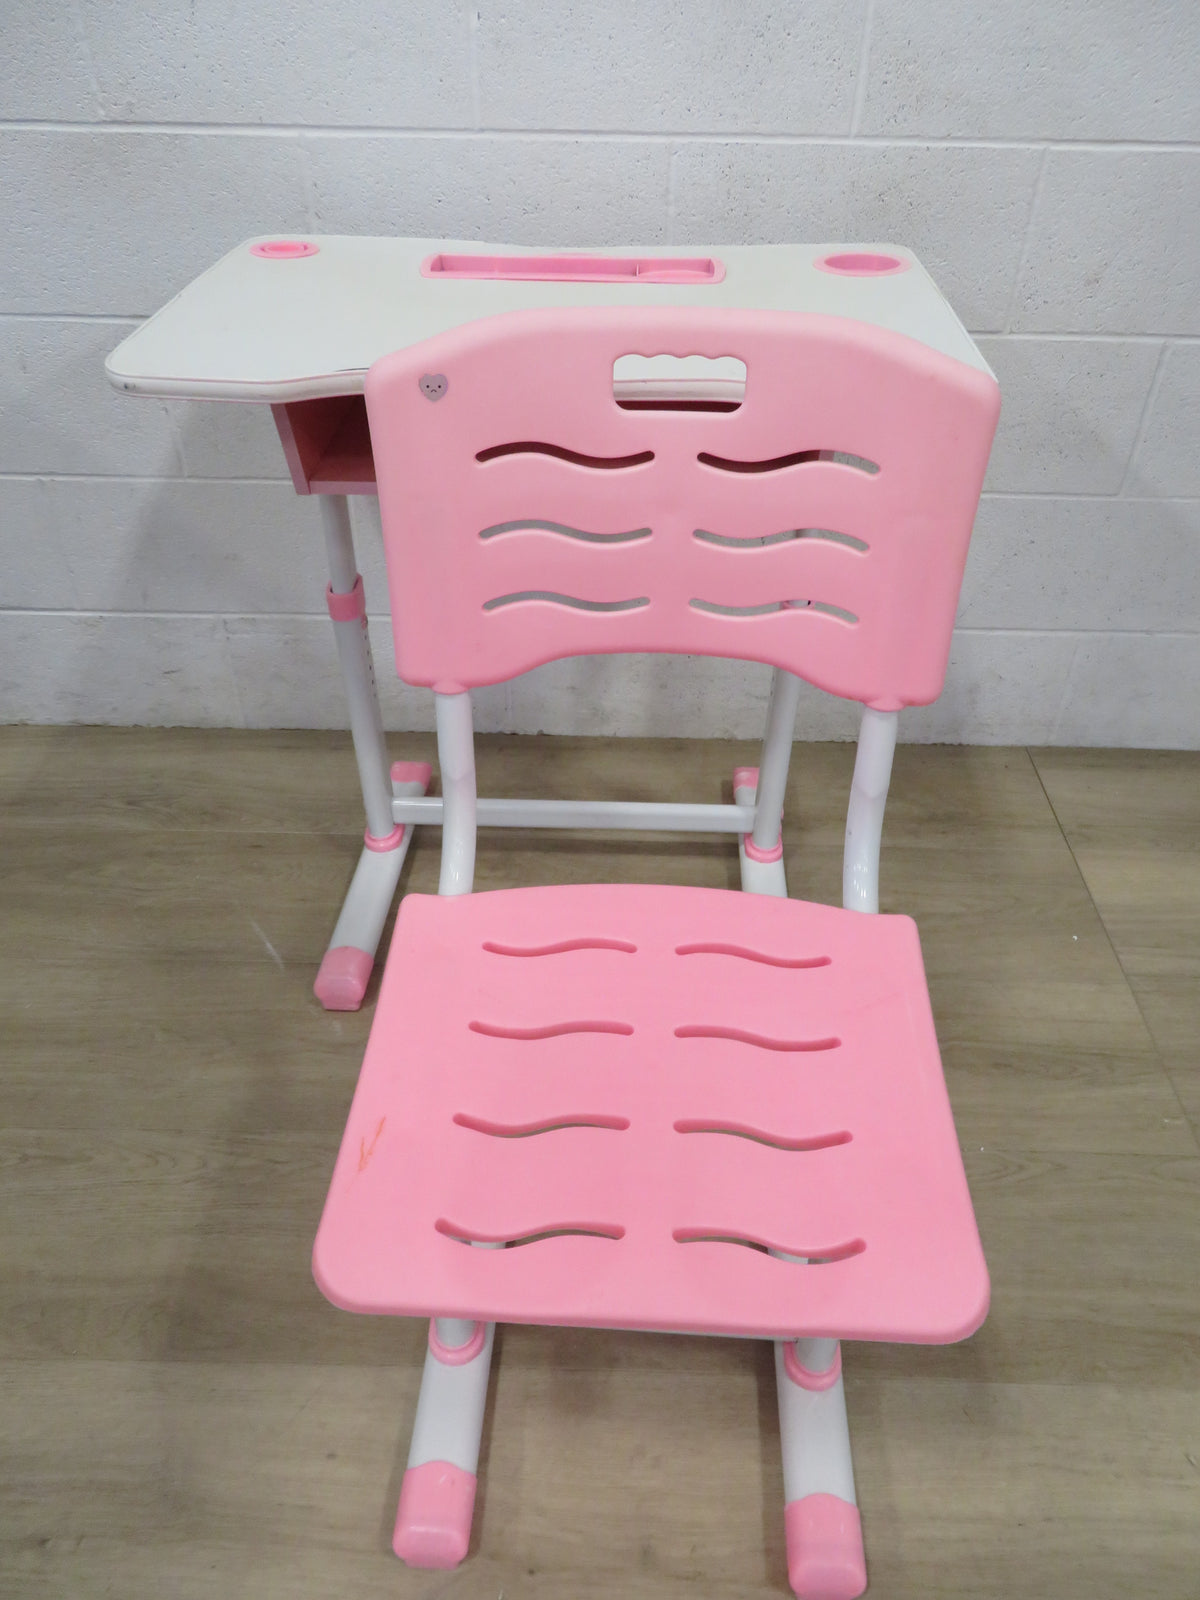 Small Childrens Desk and Chair Set in Pink